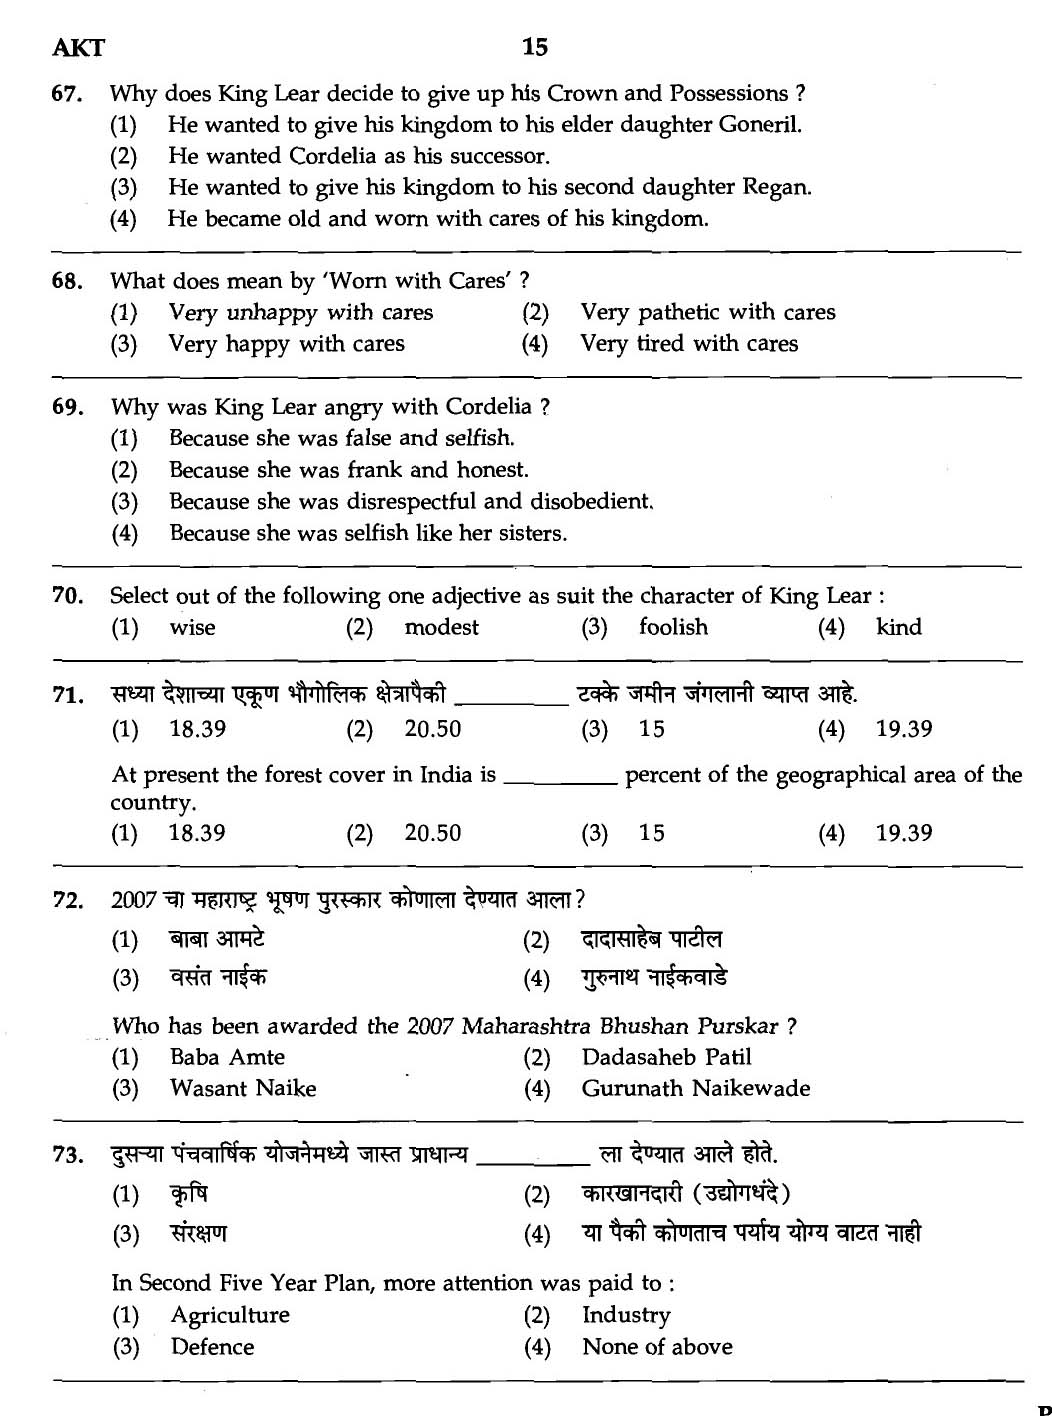 MPSC Agricultural Services Exam 2007 General Question Paper 13